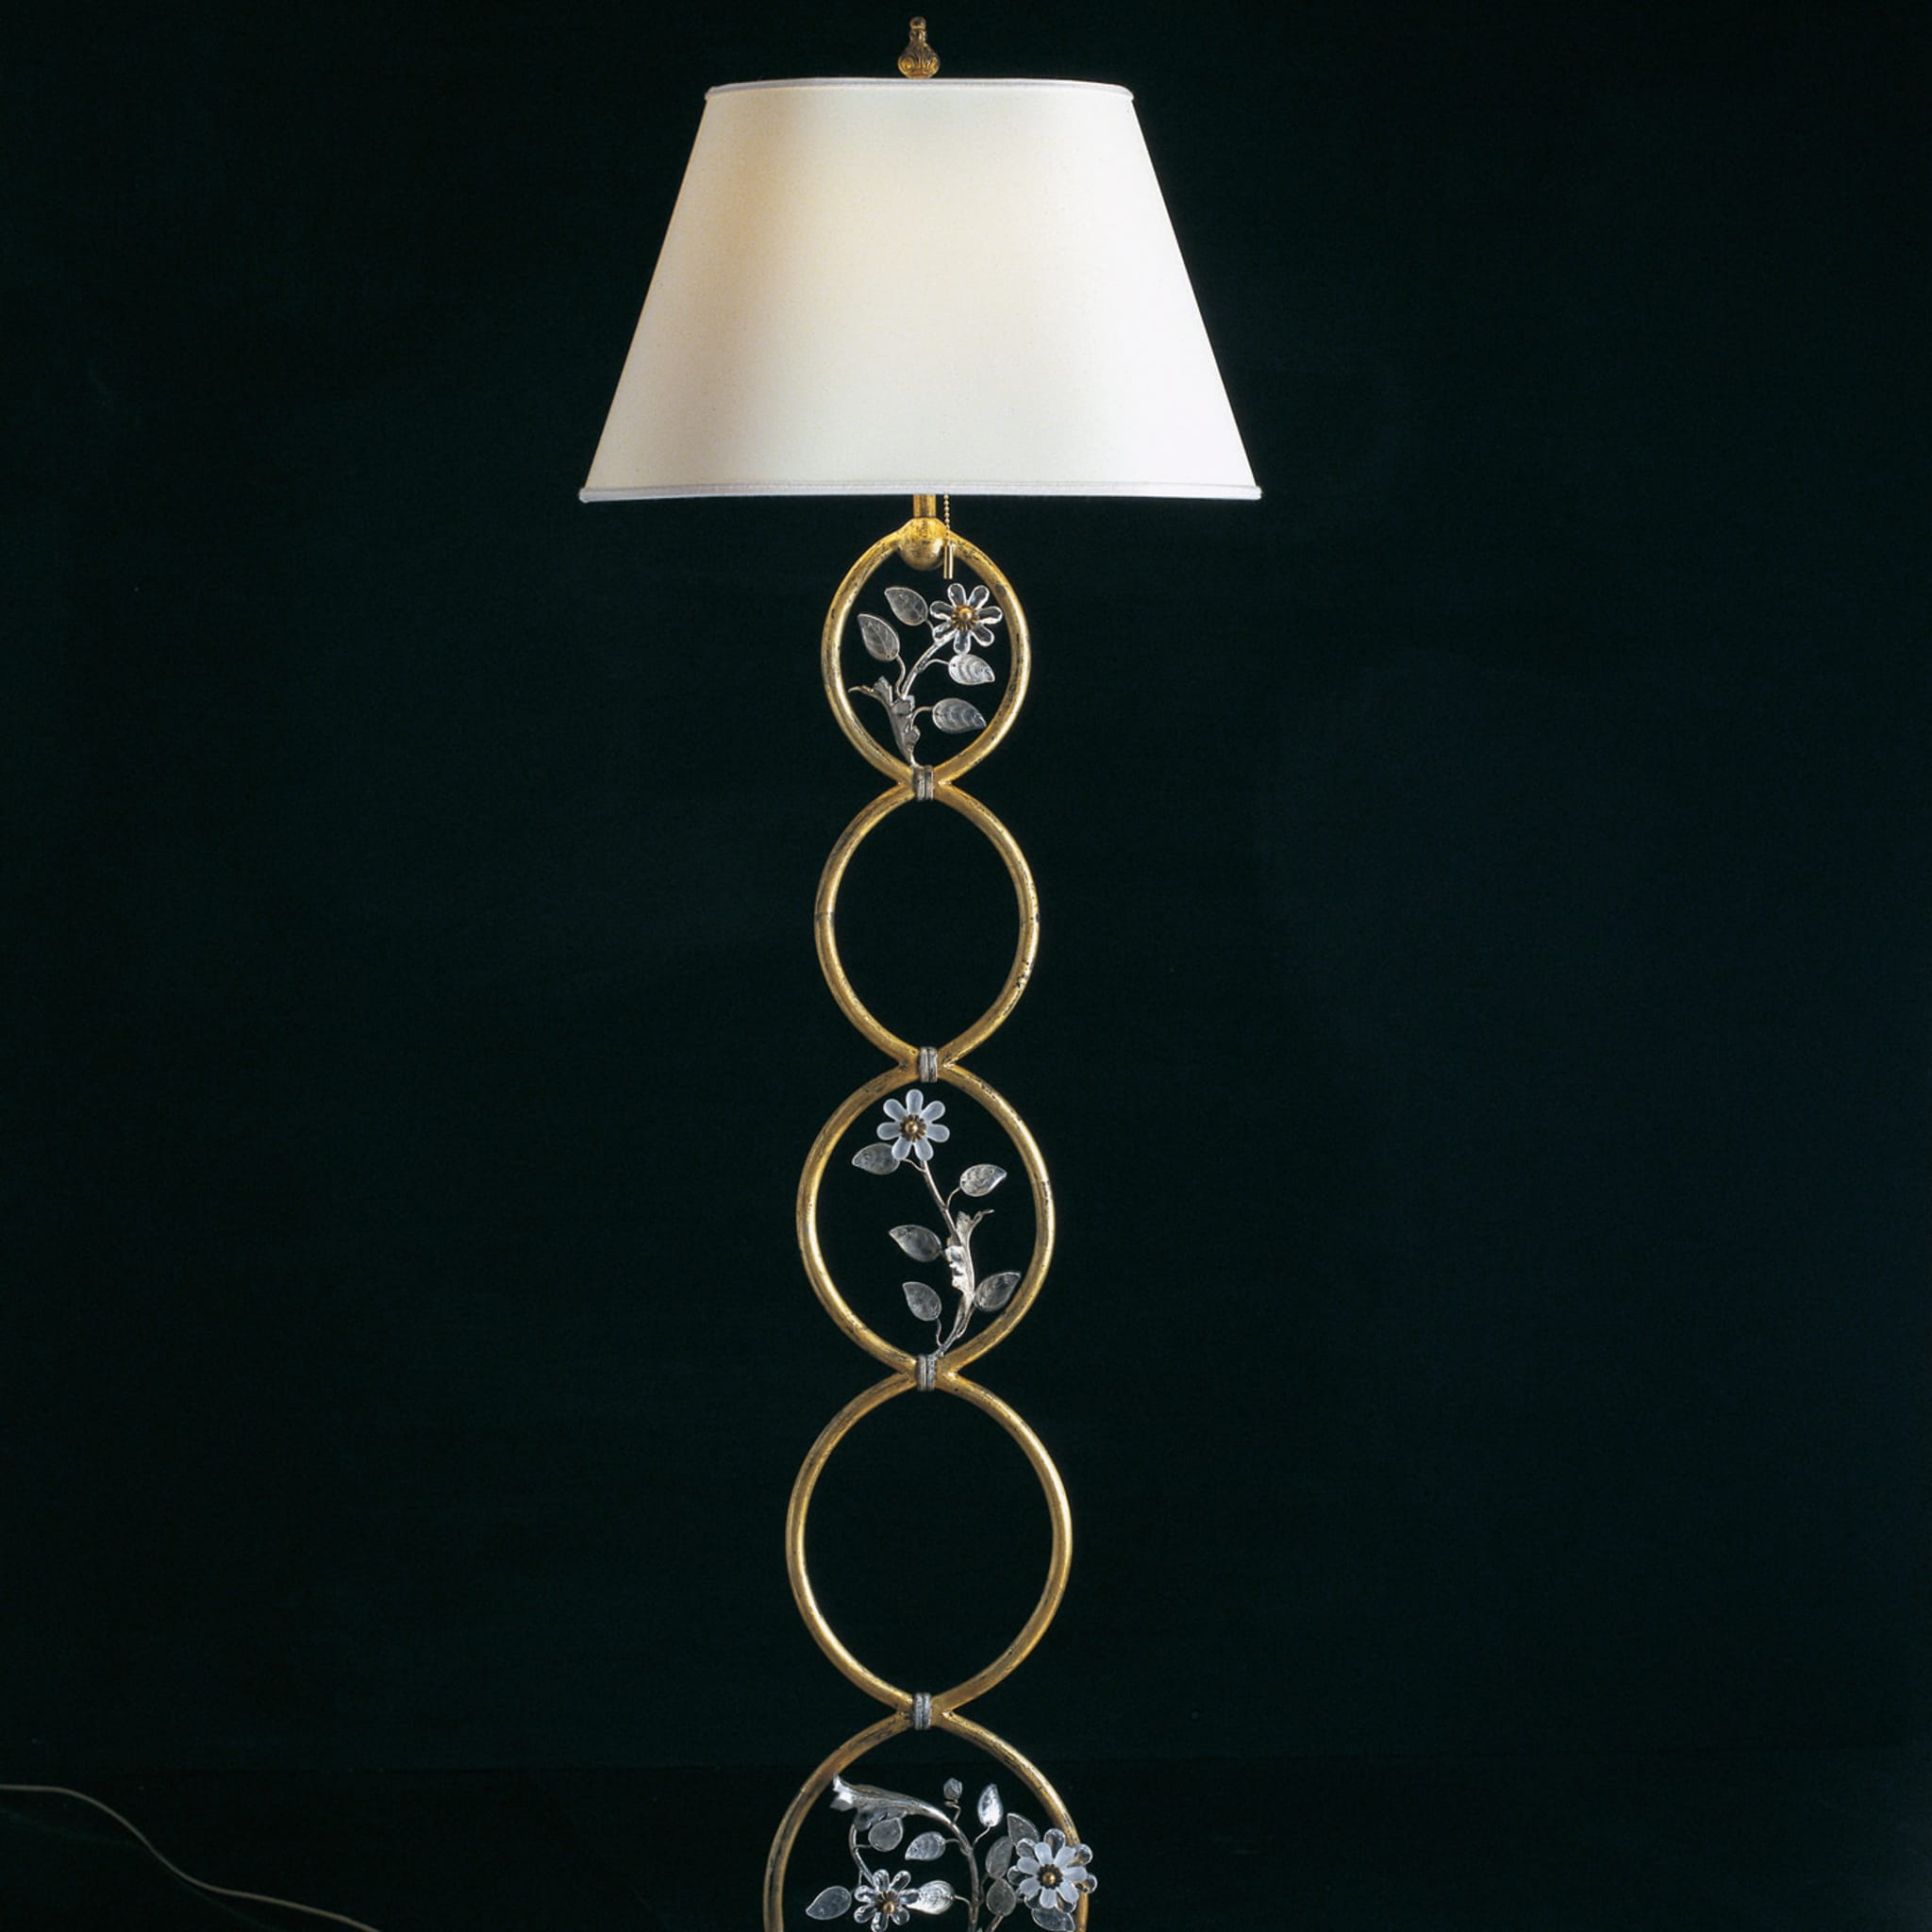 Floor Lamp with Marble Base - Alternative view 1